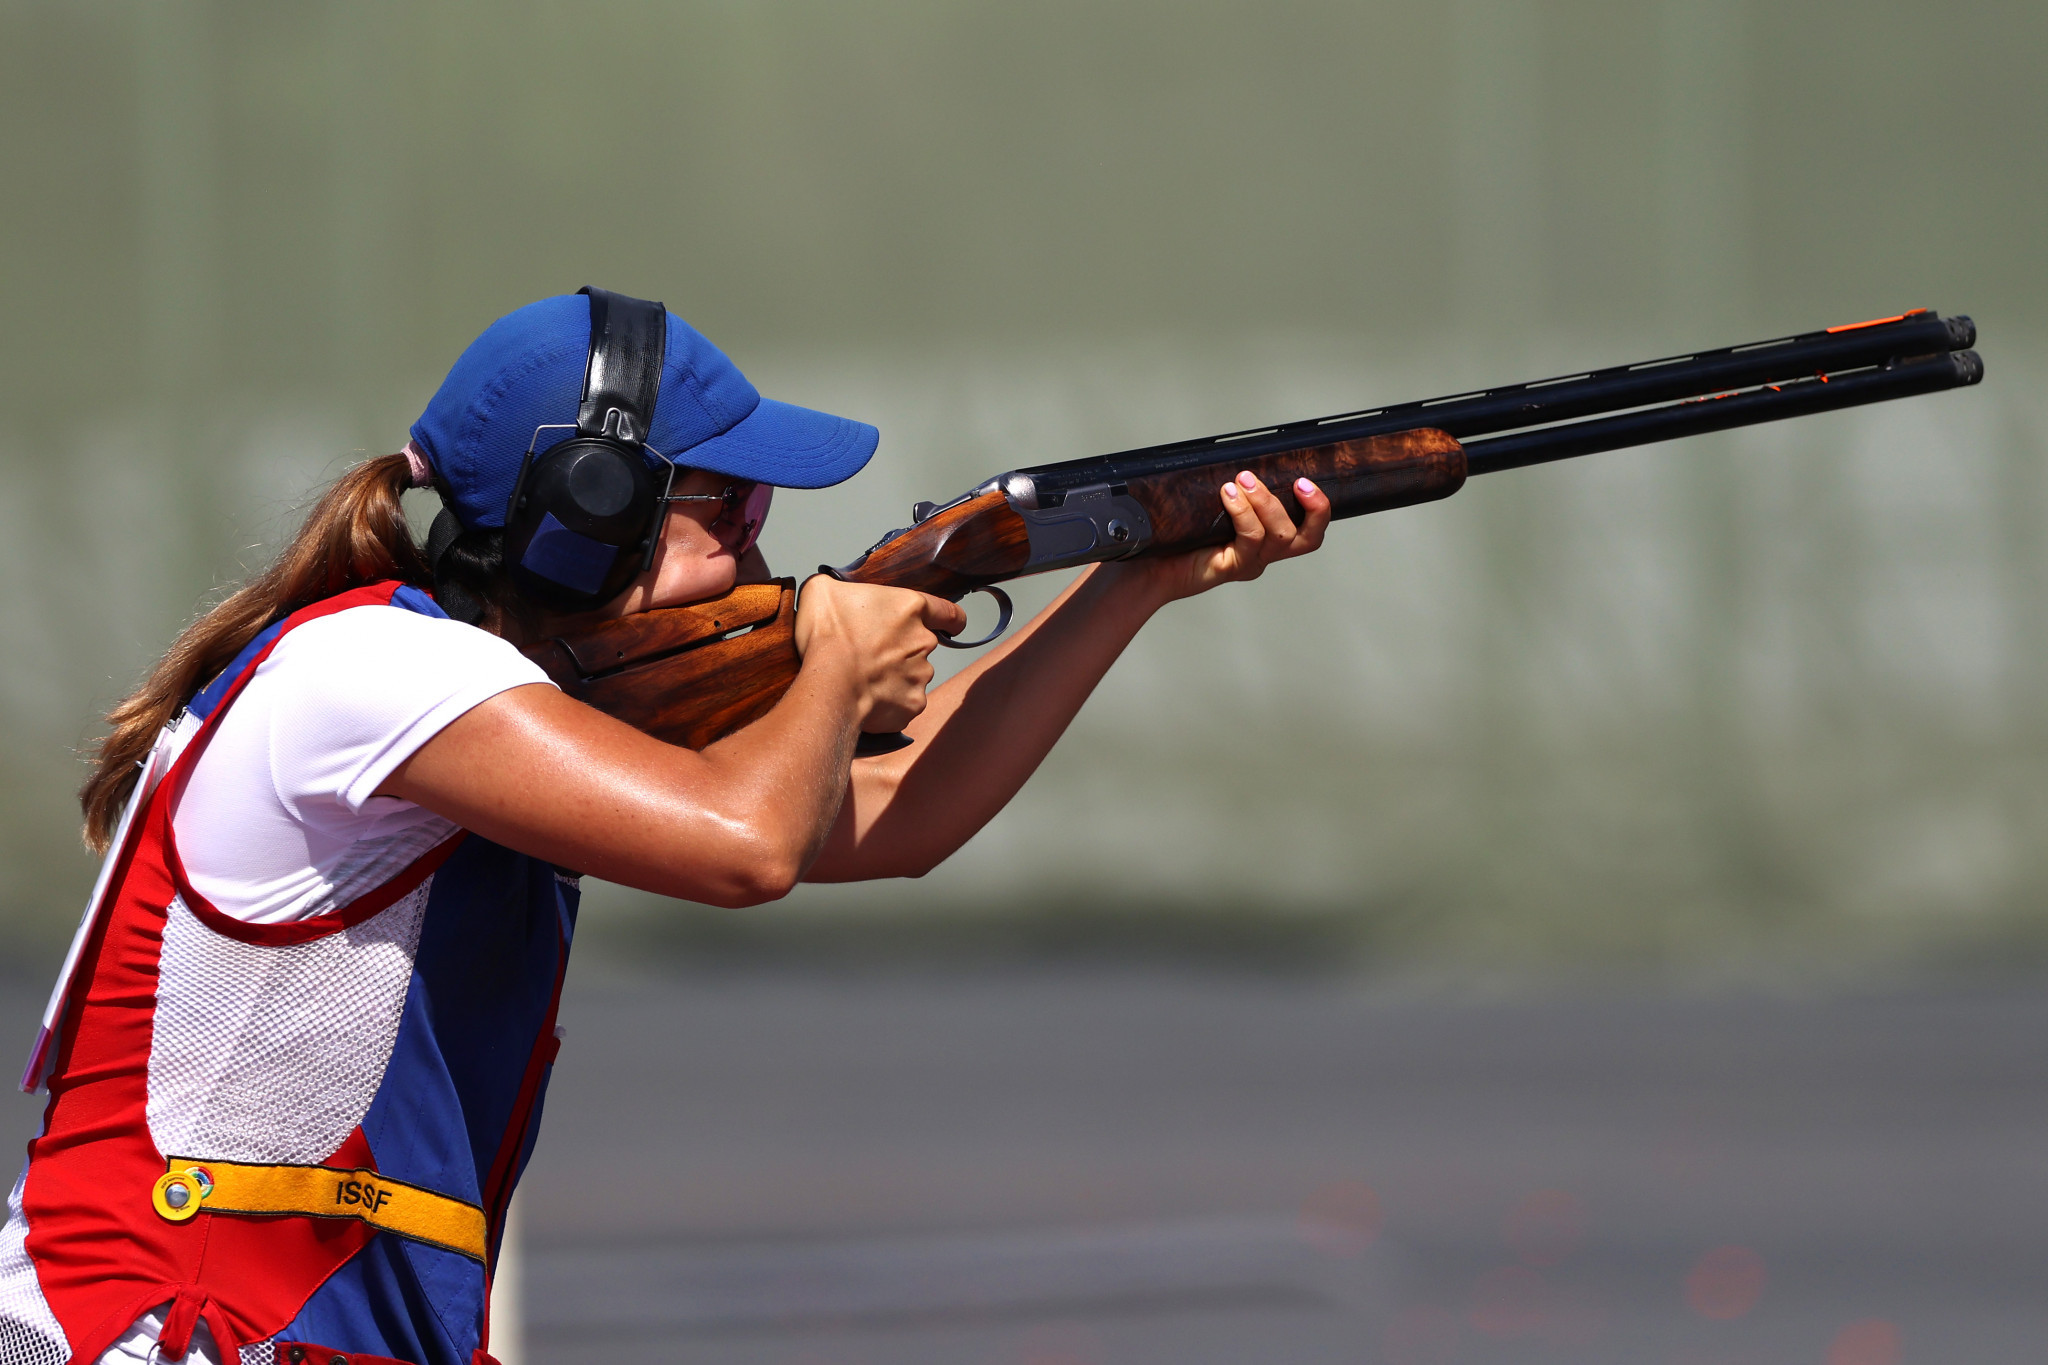 Francisca Crovetto Chadid led women's qualification by two shots ©Getty Images